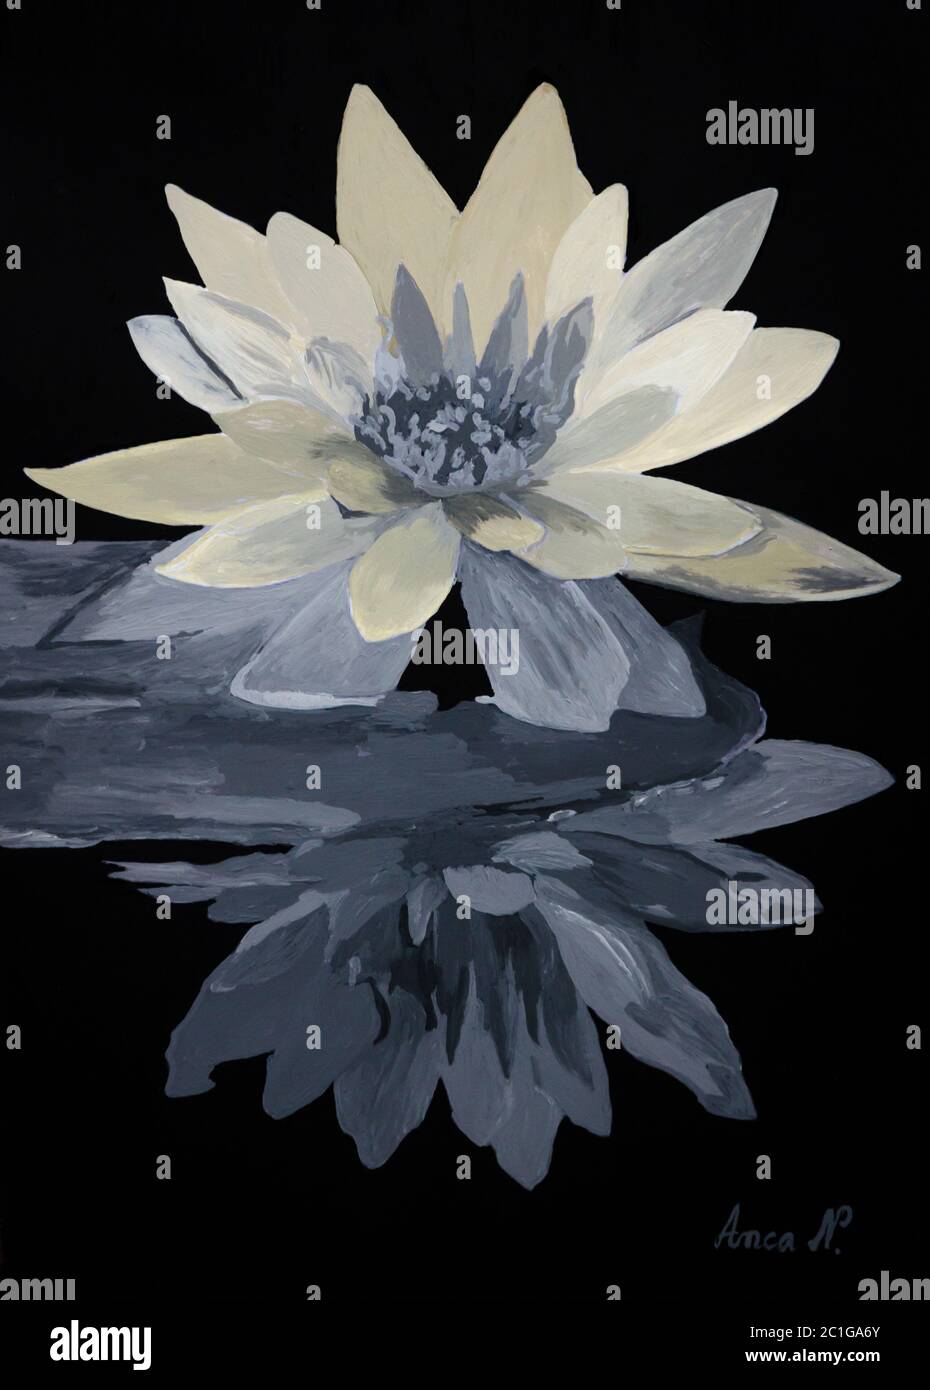 Black and white flower drawing Stock Photo